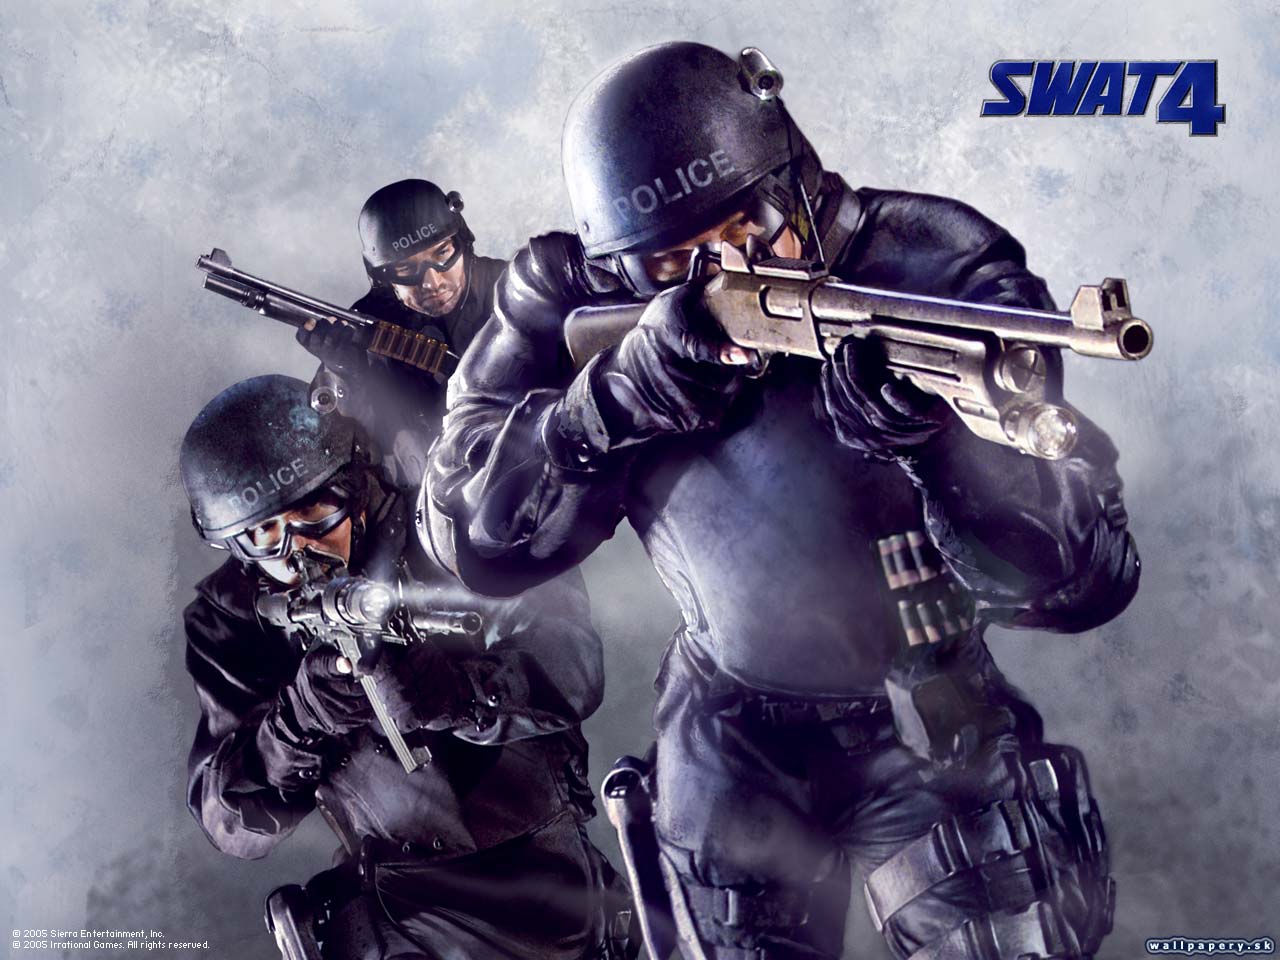 Swat 4: Special Weapons and Tactics